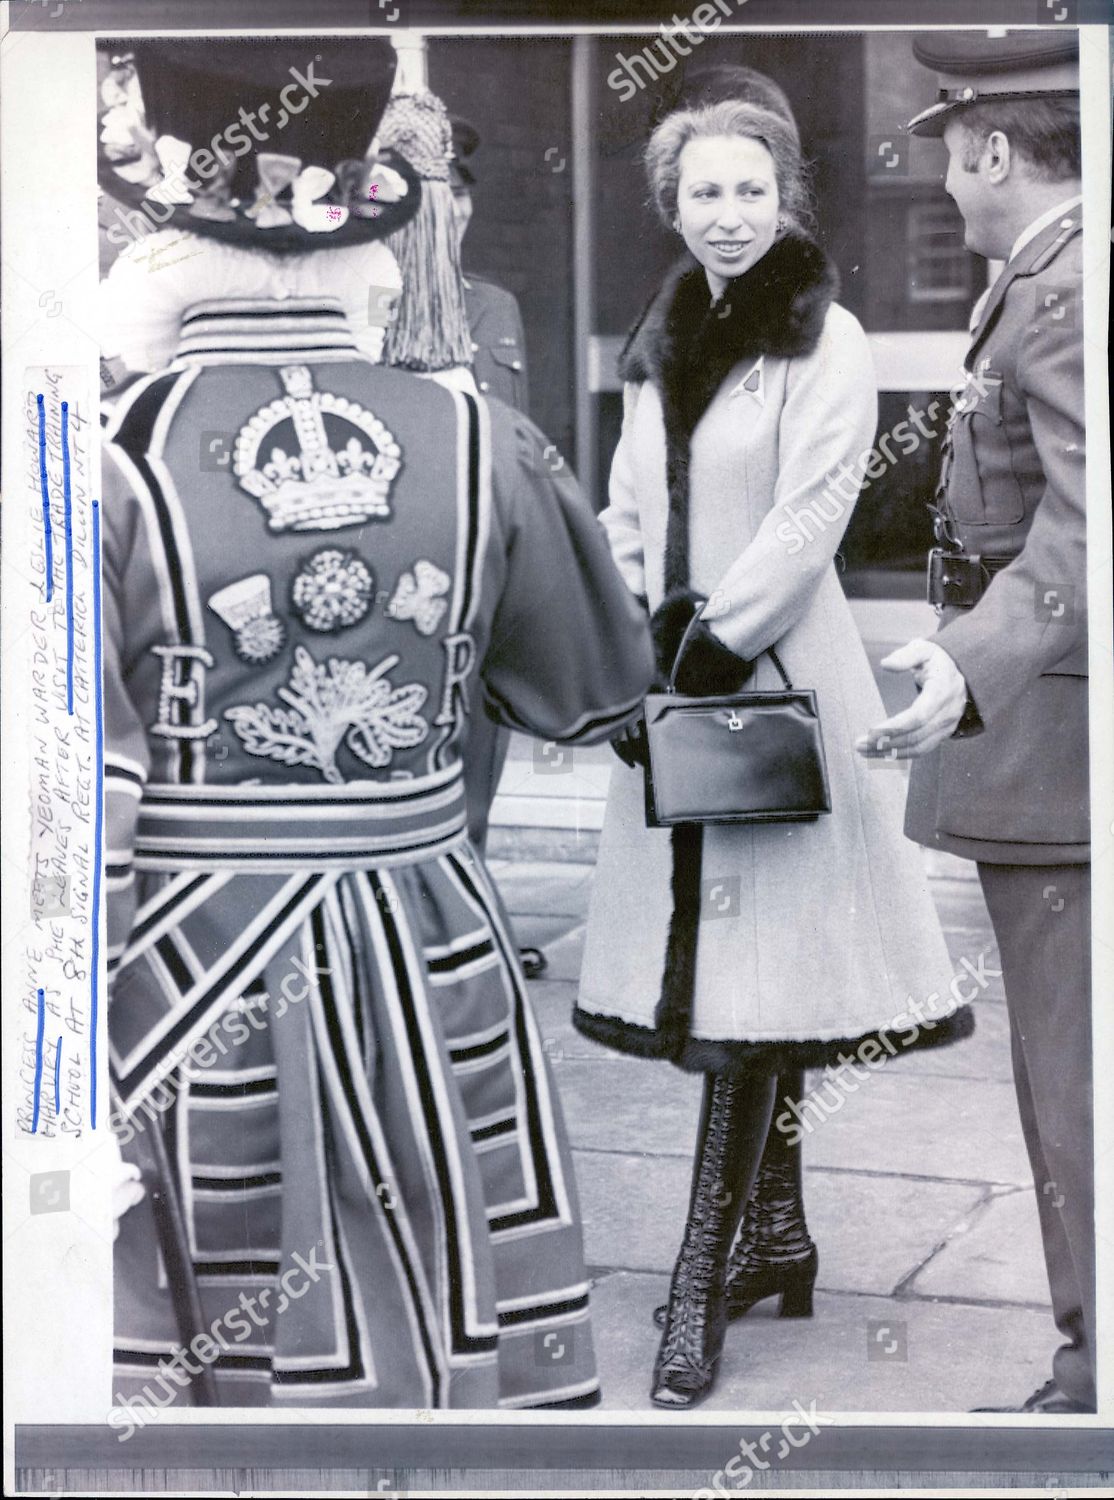 princess-anne-now-princess-royal-november-1978-princess-anne-meets-yeoman-warder-leslie-howard-harvey-as-she-leaves-after-visit-to-the-trade-training-school-at-8th-signal-regt-at-caiterick-dileen-nt4-royalty-shutterstock-editorial-890893a.jpg